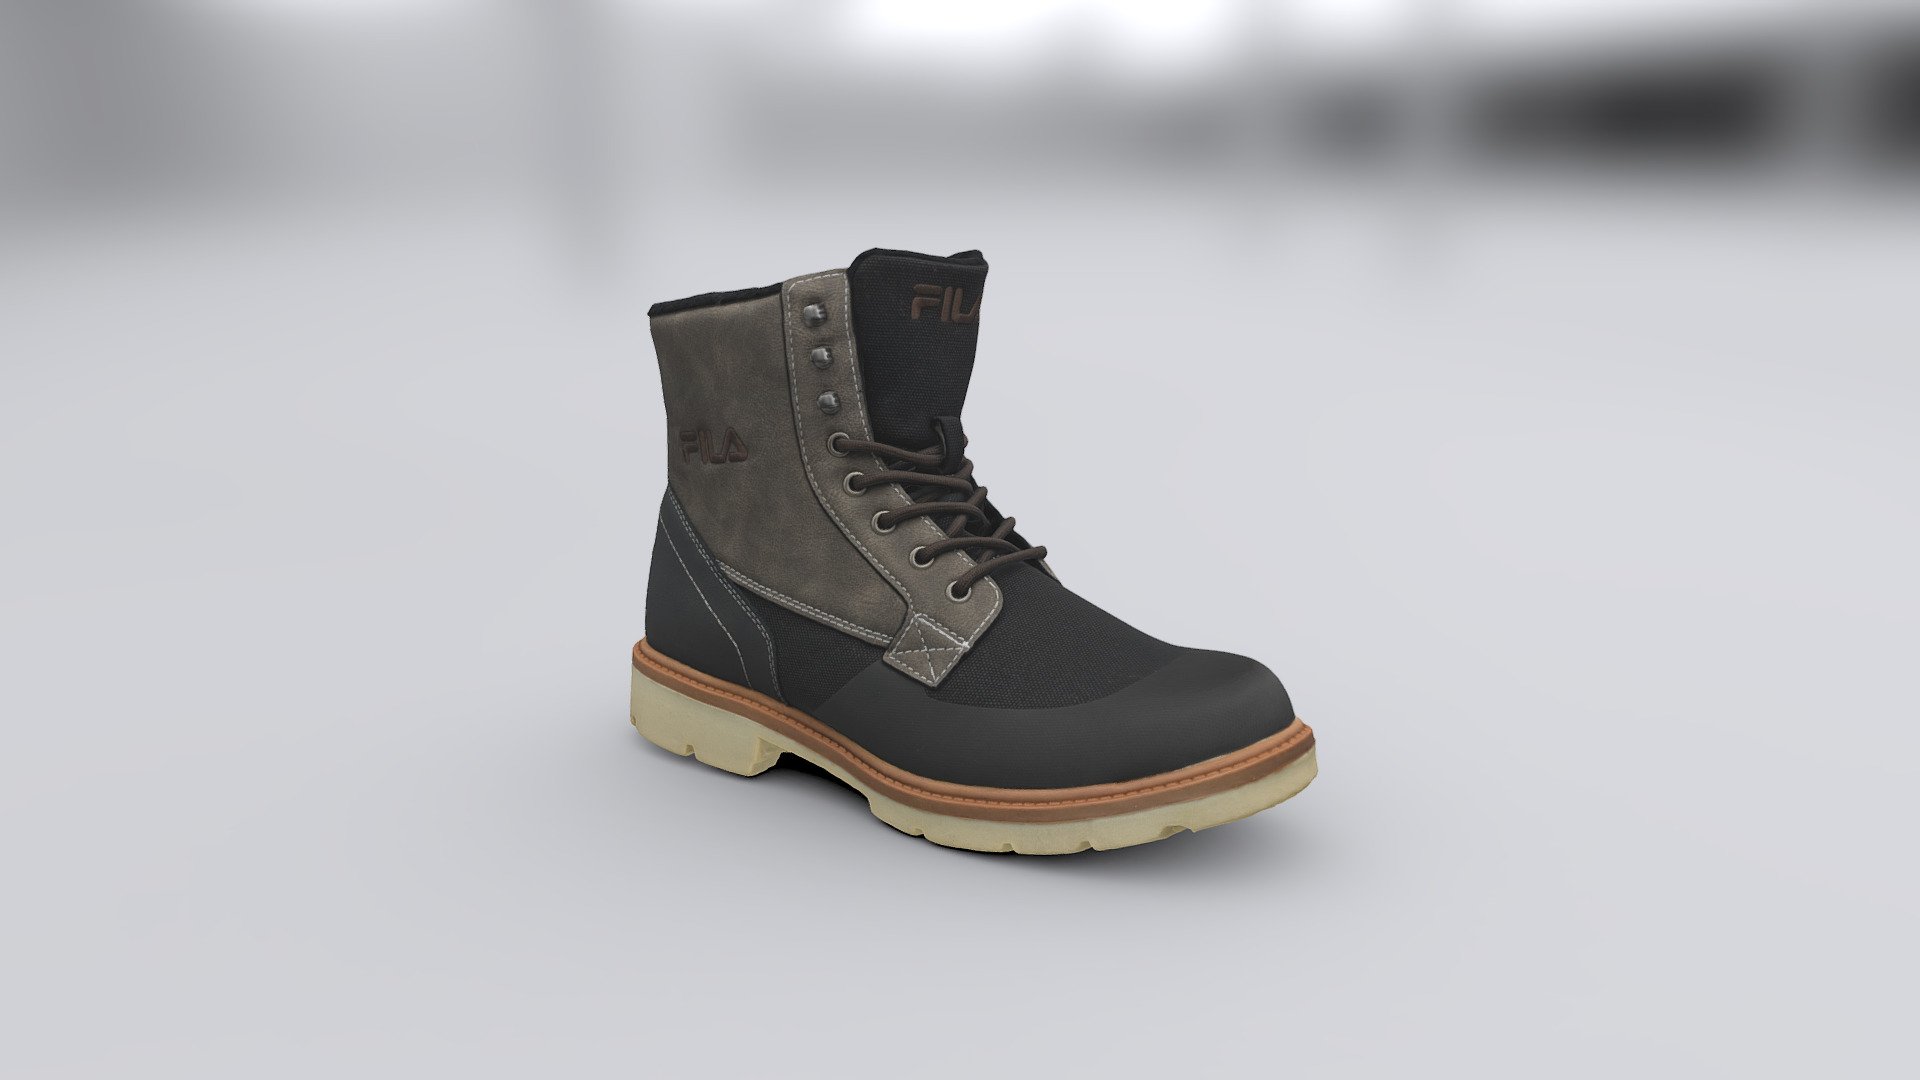 Fila Lace-up Boots




Created by our new 3D Scanning technique

No remodeling, no retexturing
 - Fila Lace-up Boots - Buy Royalty Free 3D model by VRModelFactory 3d model